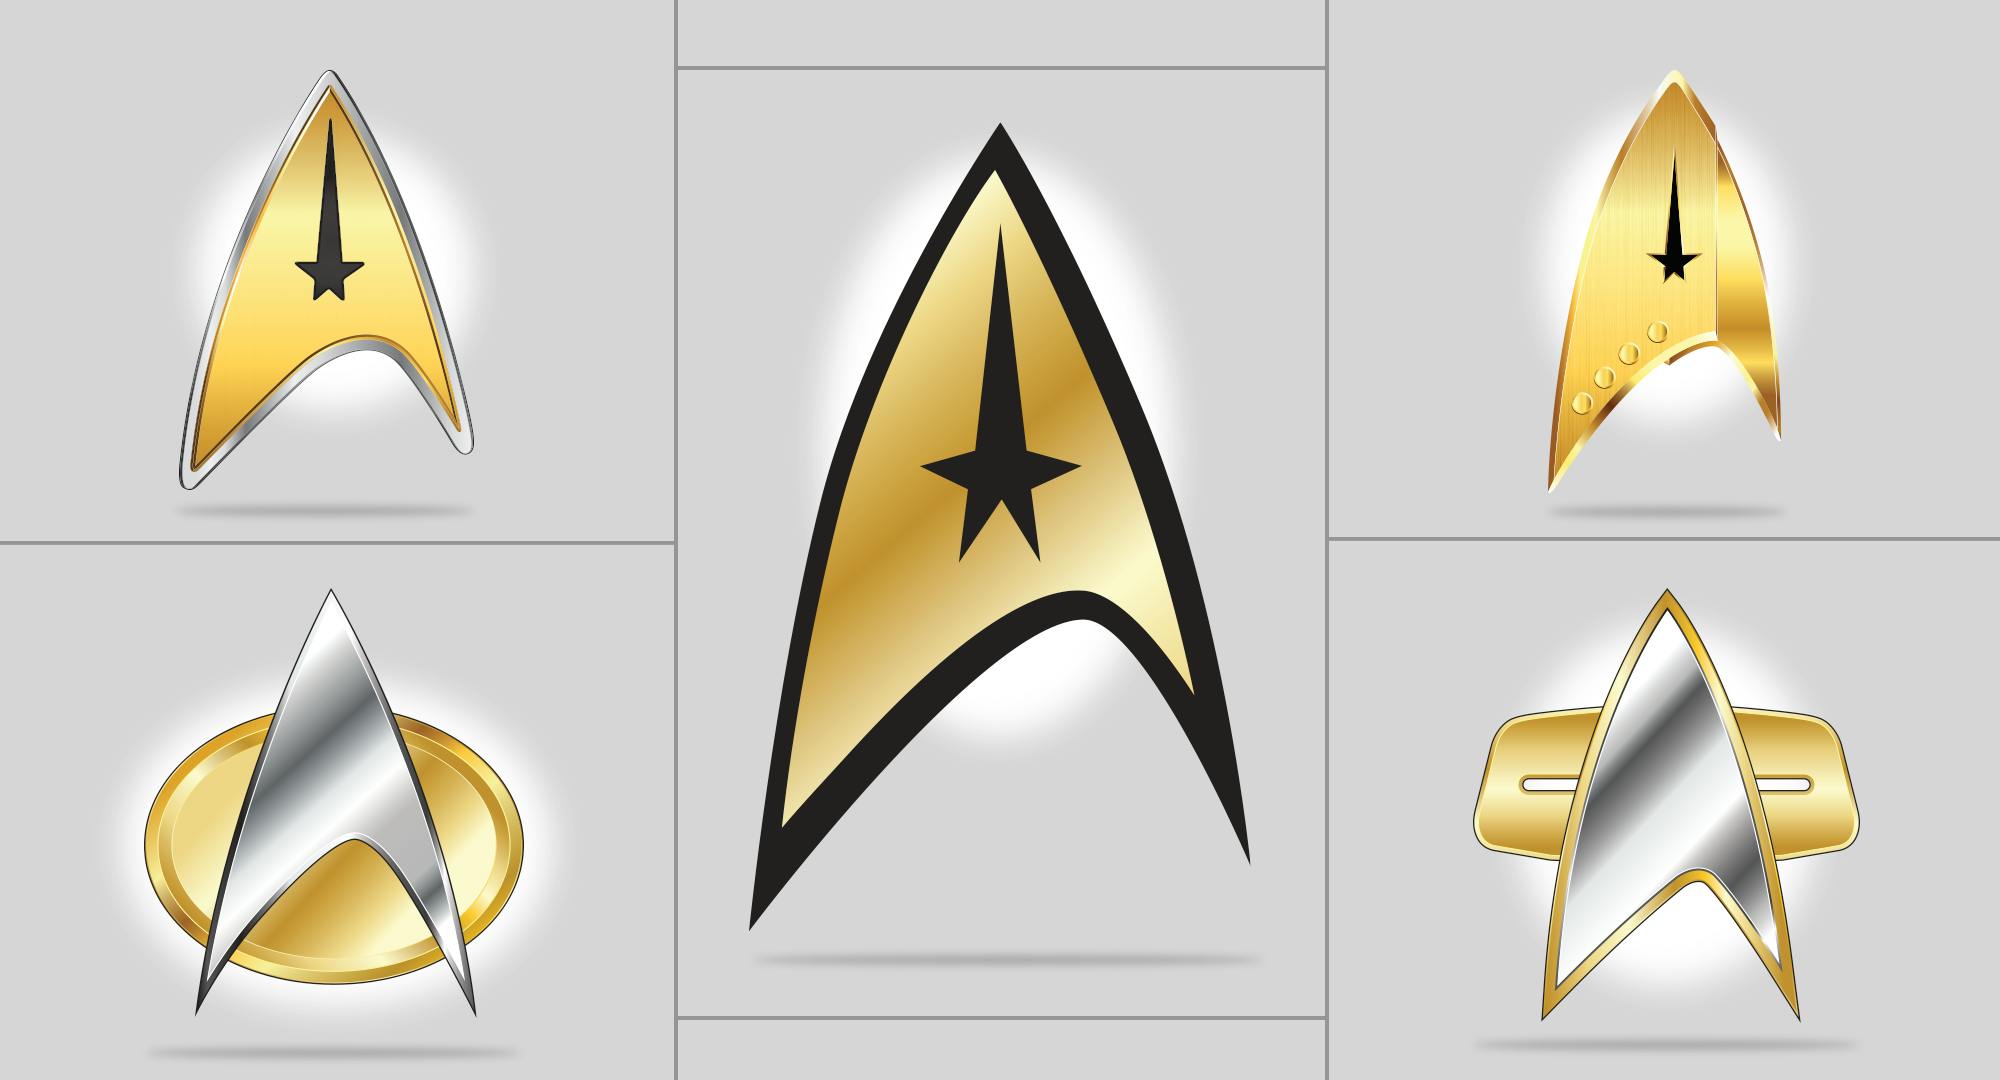 Let's Revisit the History of the Starfleet Insignia